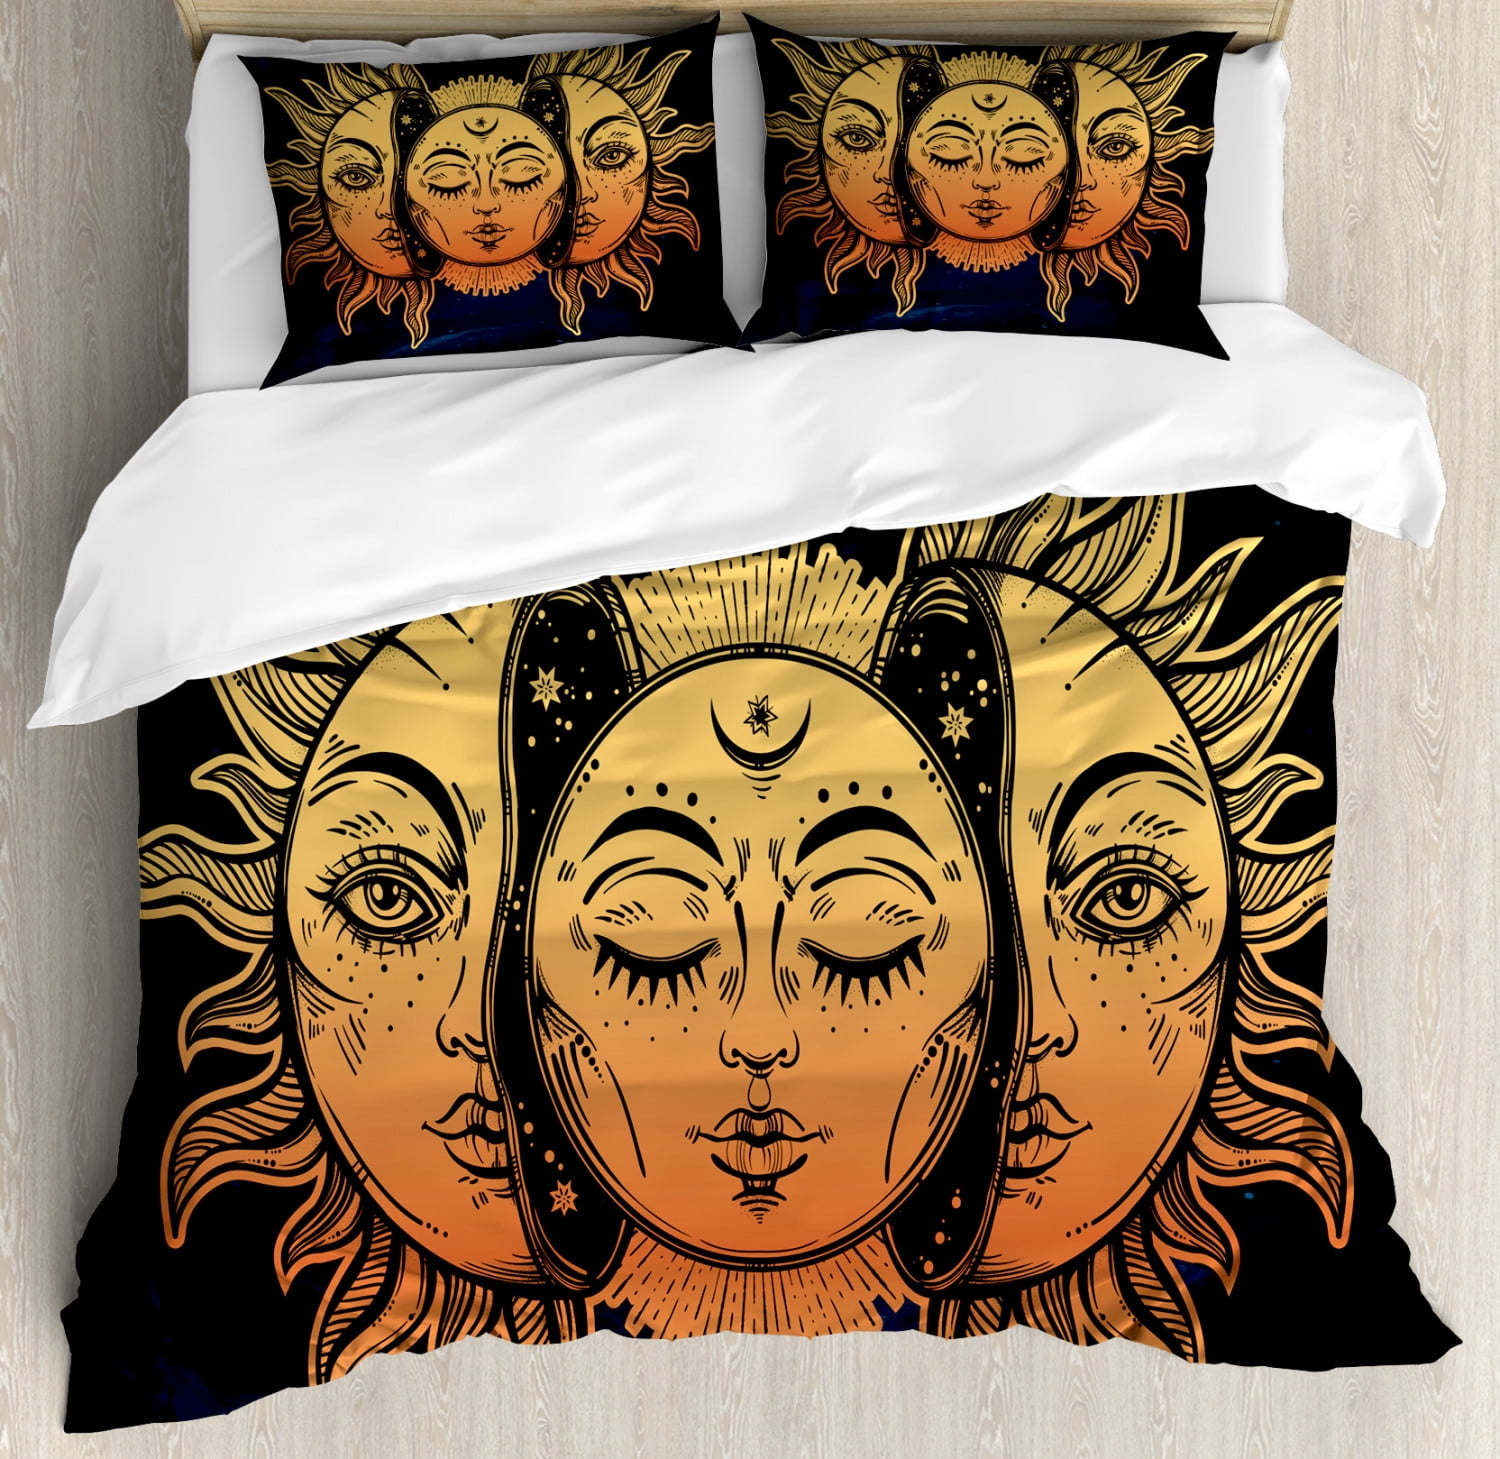 Coloring Book Style Celestial Motif with Faces Inspirations Twin Size Rose White Lunarable Sun and Moon Fitted Sheet Soft Decorative Fabric Bedding All-Round Elastic Pocket